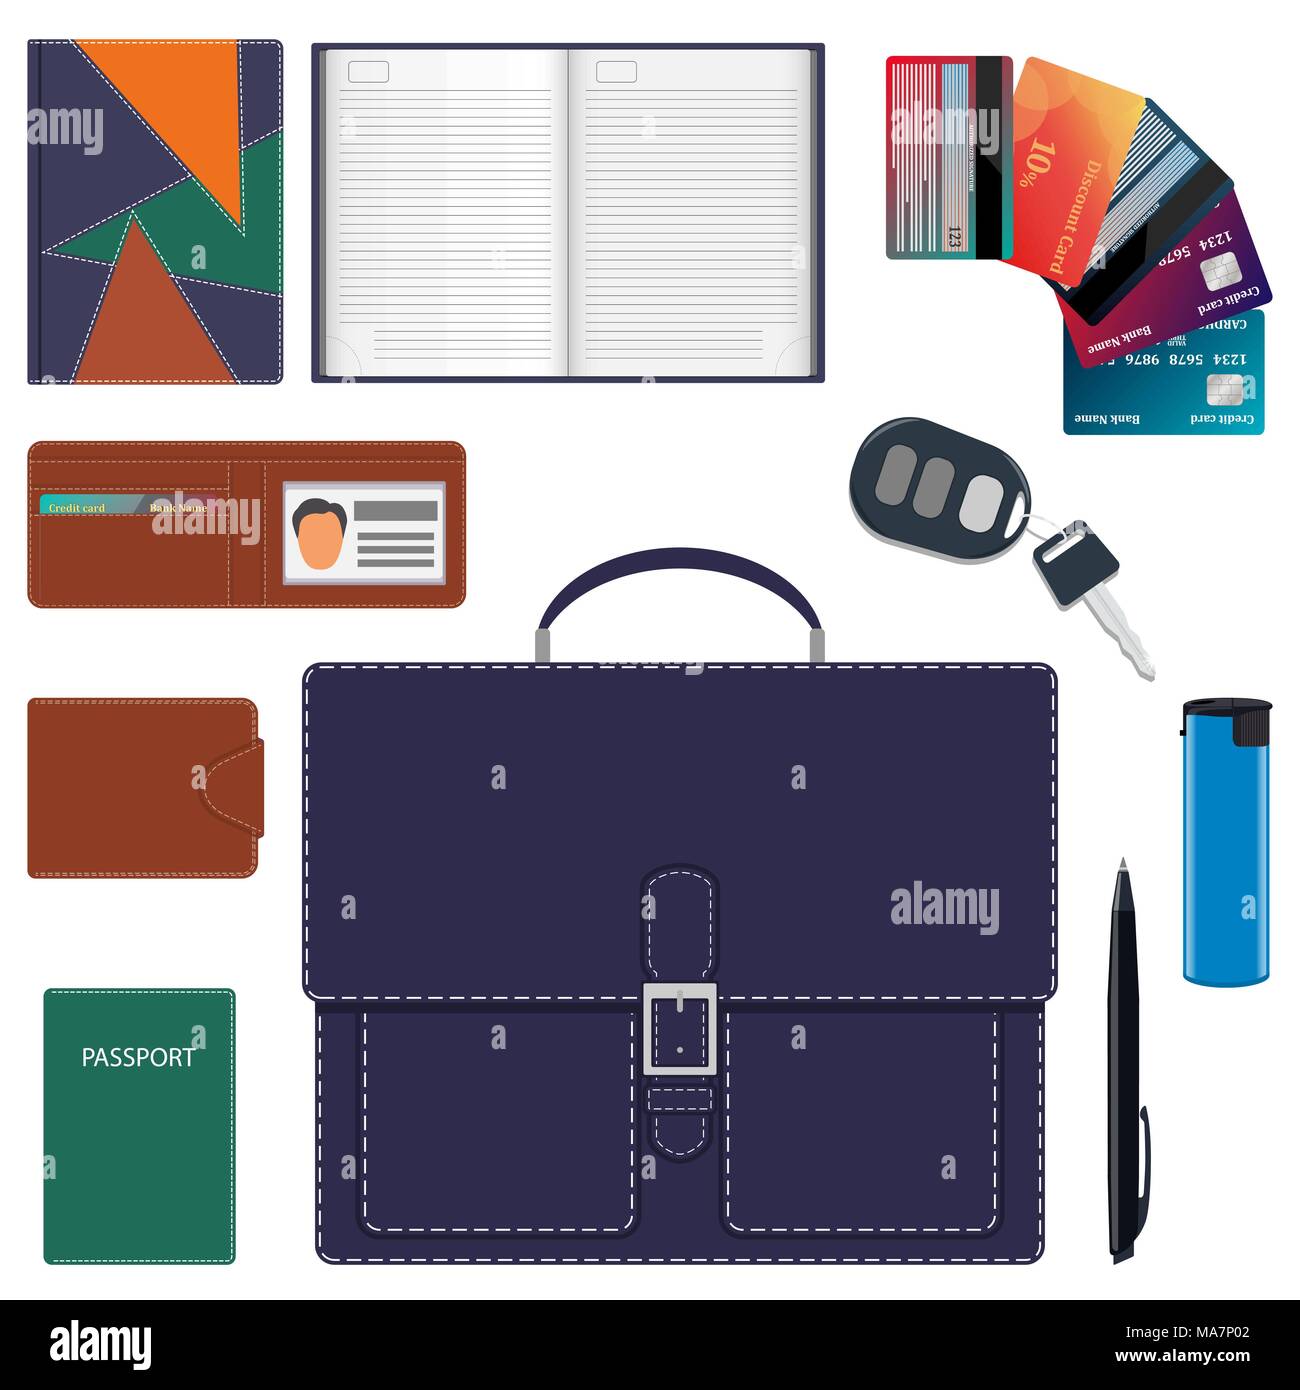 Men s briefcase and its contents. Men s bag and a common set of objects carry with them. Diary, wallet, bank cards, car keys, passport, lighter, pen.  Stock Vector